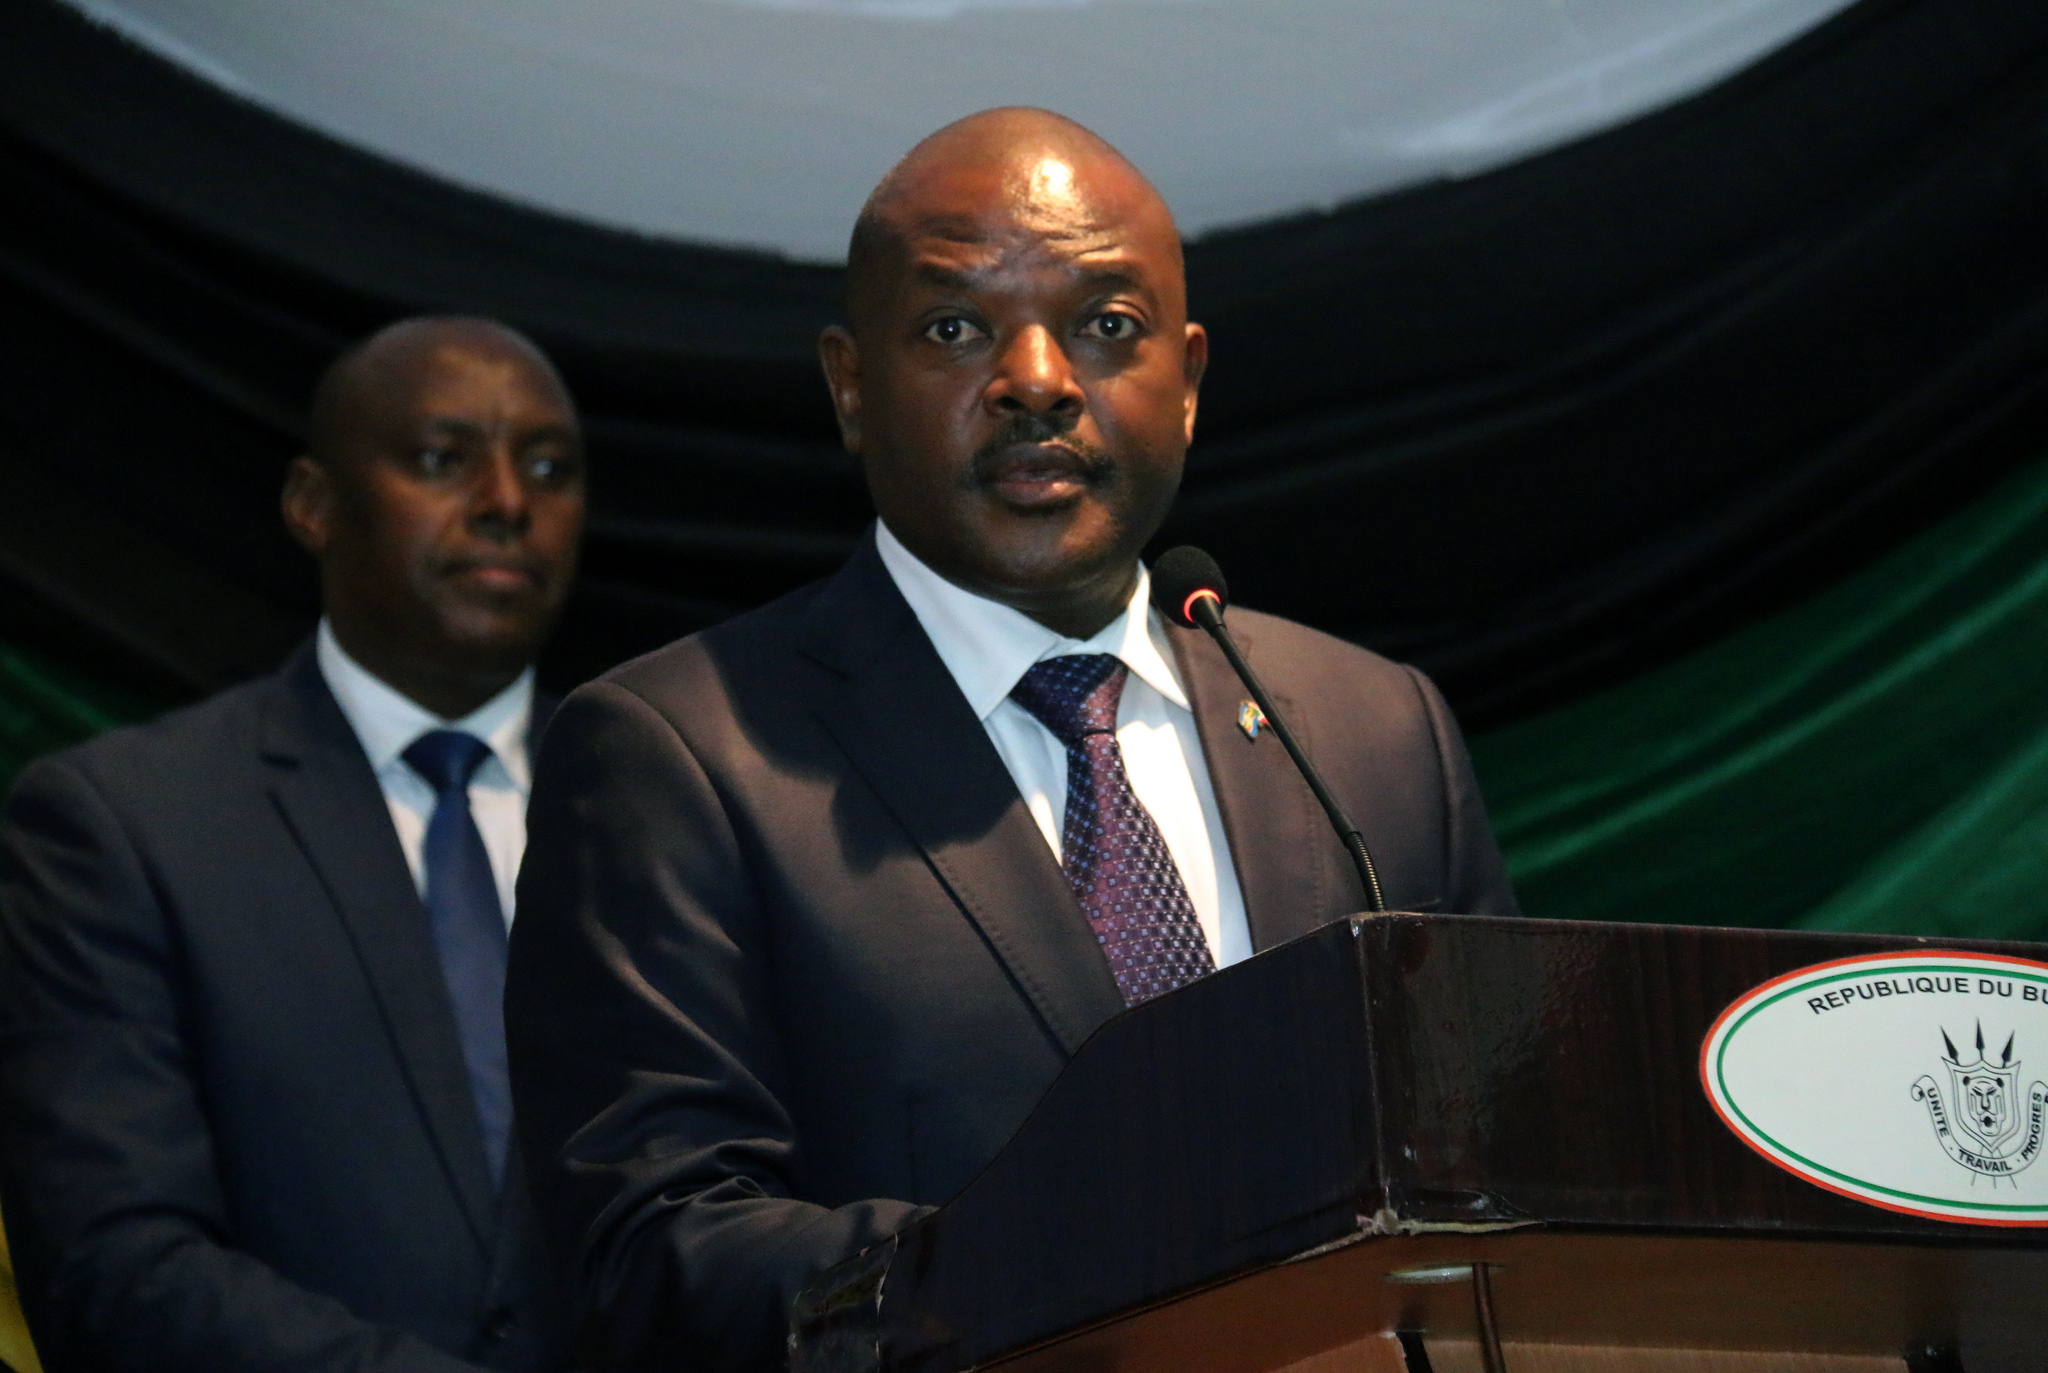 Speech of H.E. Pierre Nkurunziza at the Sixth Scientific Conference on Health in the East African Community